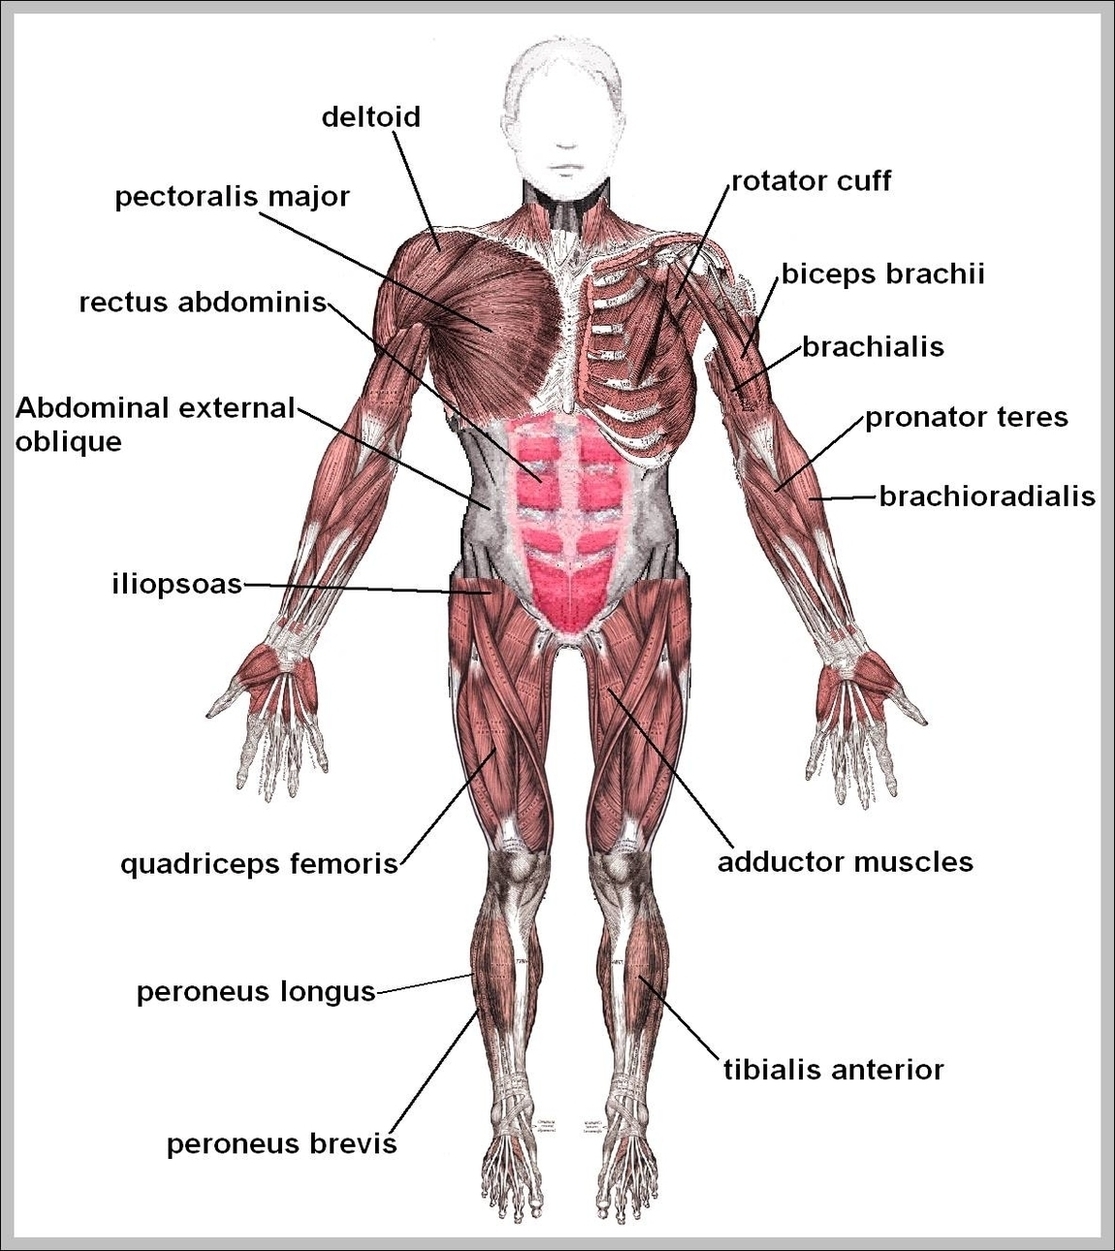 Muscles Of The Body Labeled Image